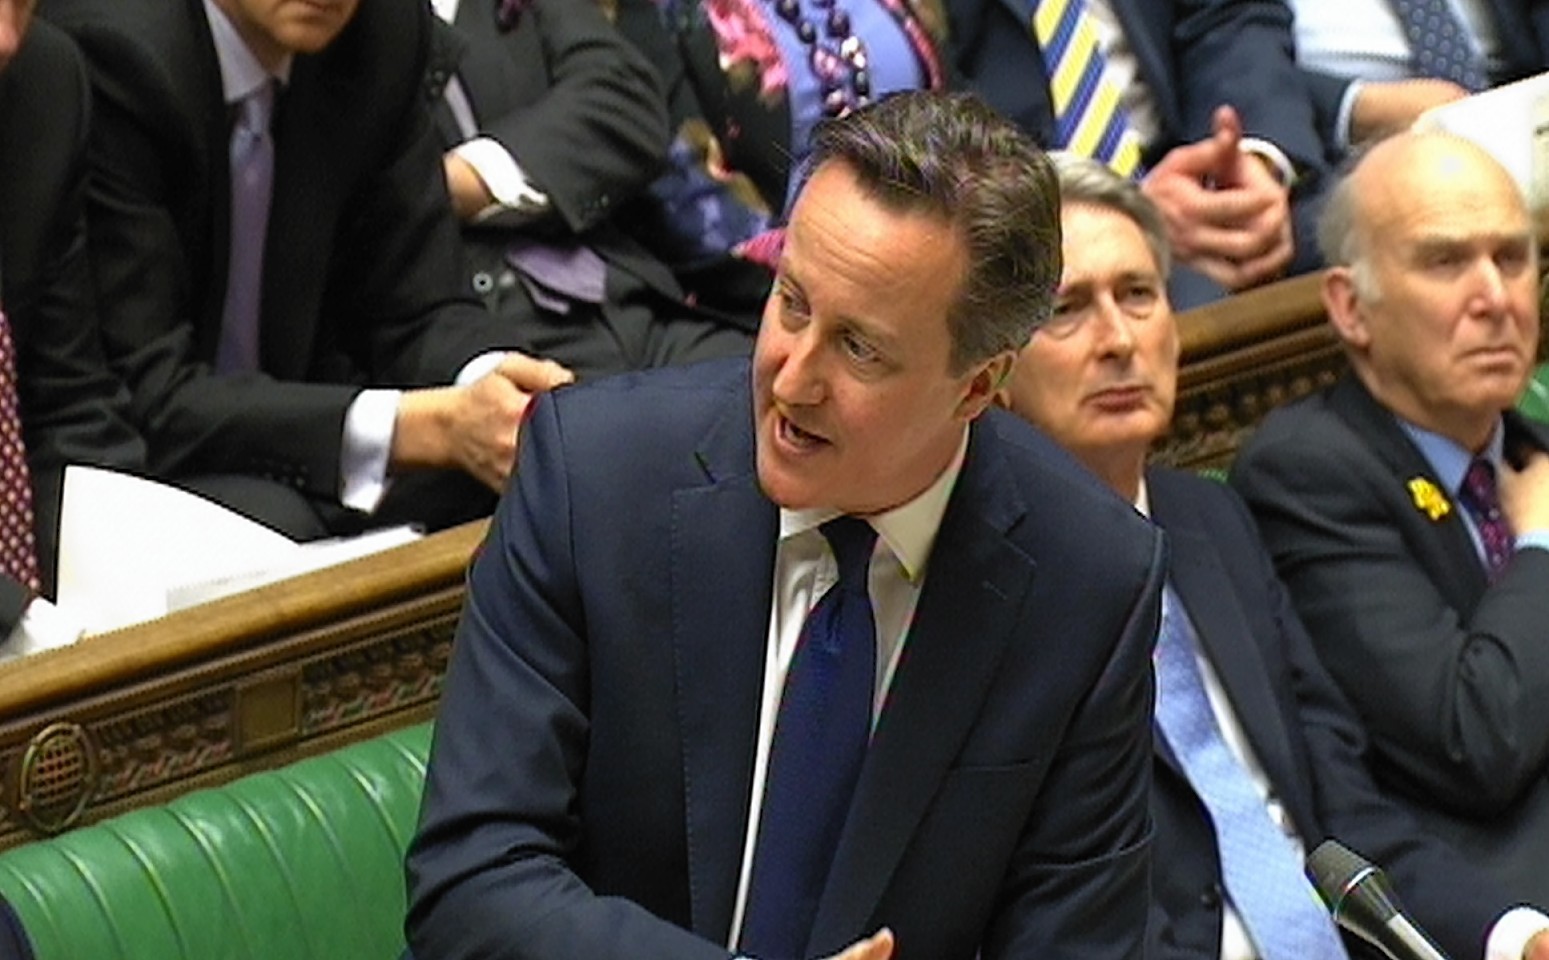 David Cameron in Prime Minister's Questions